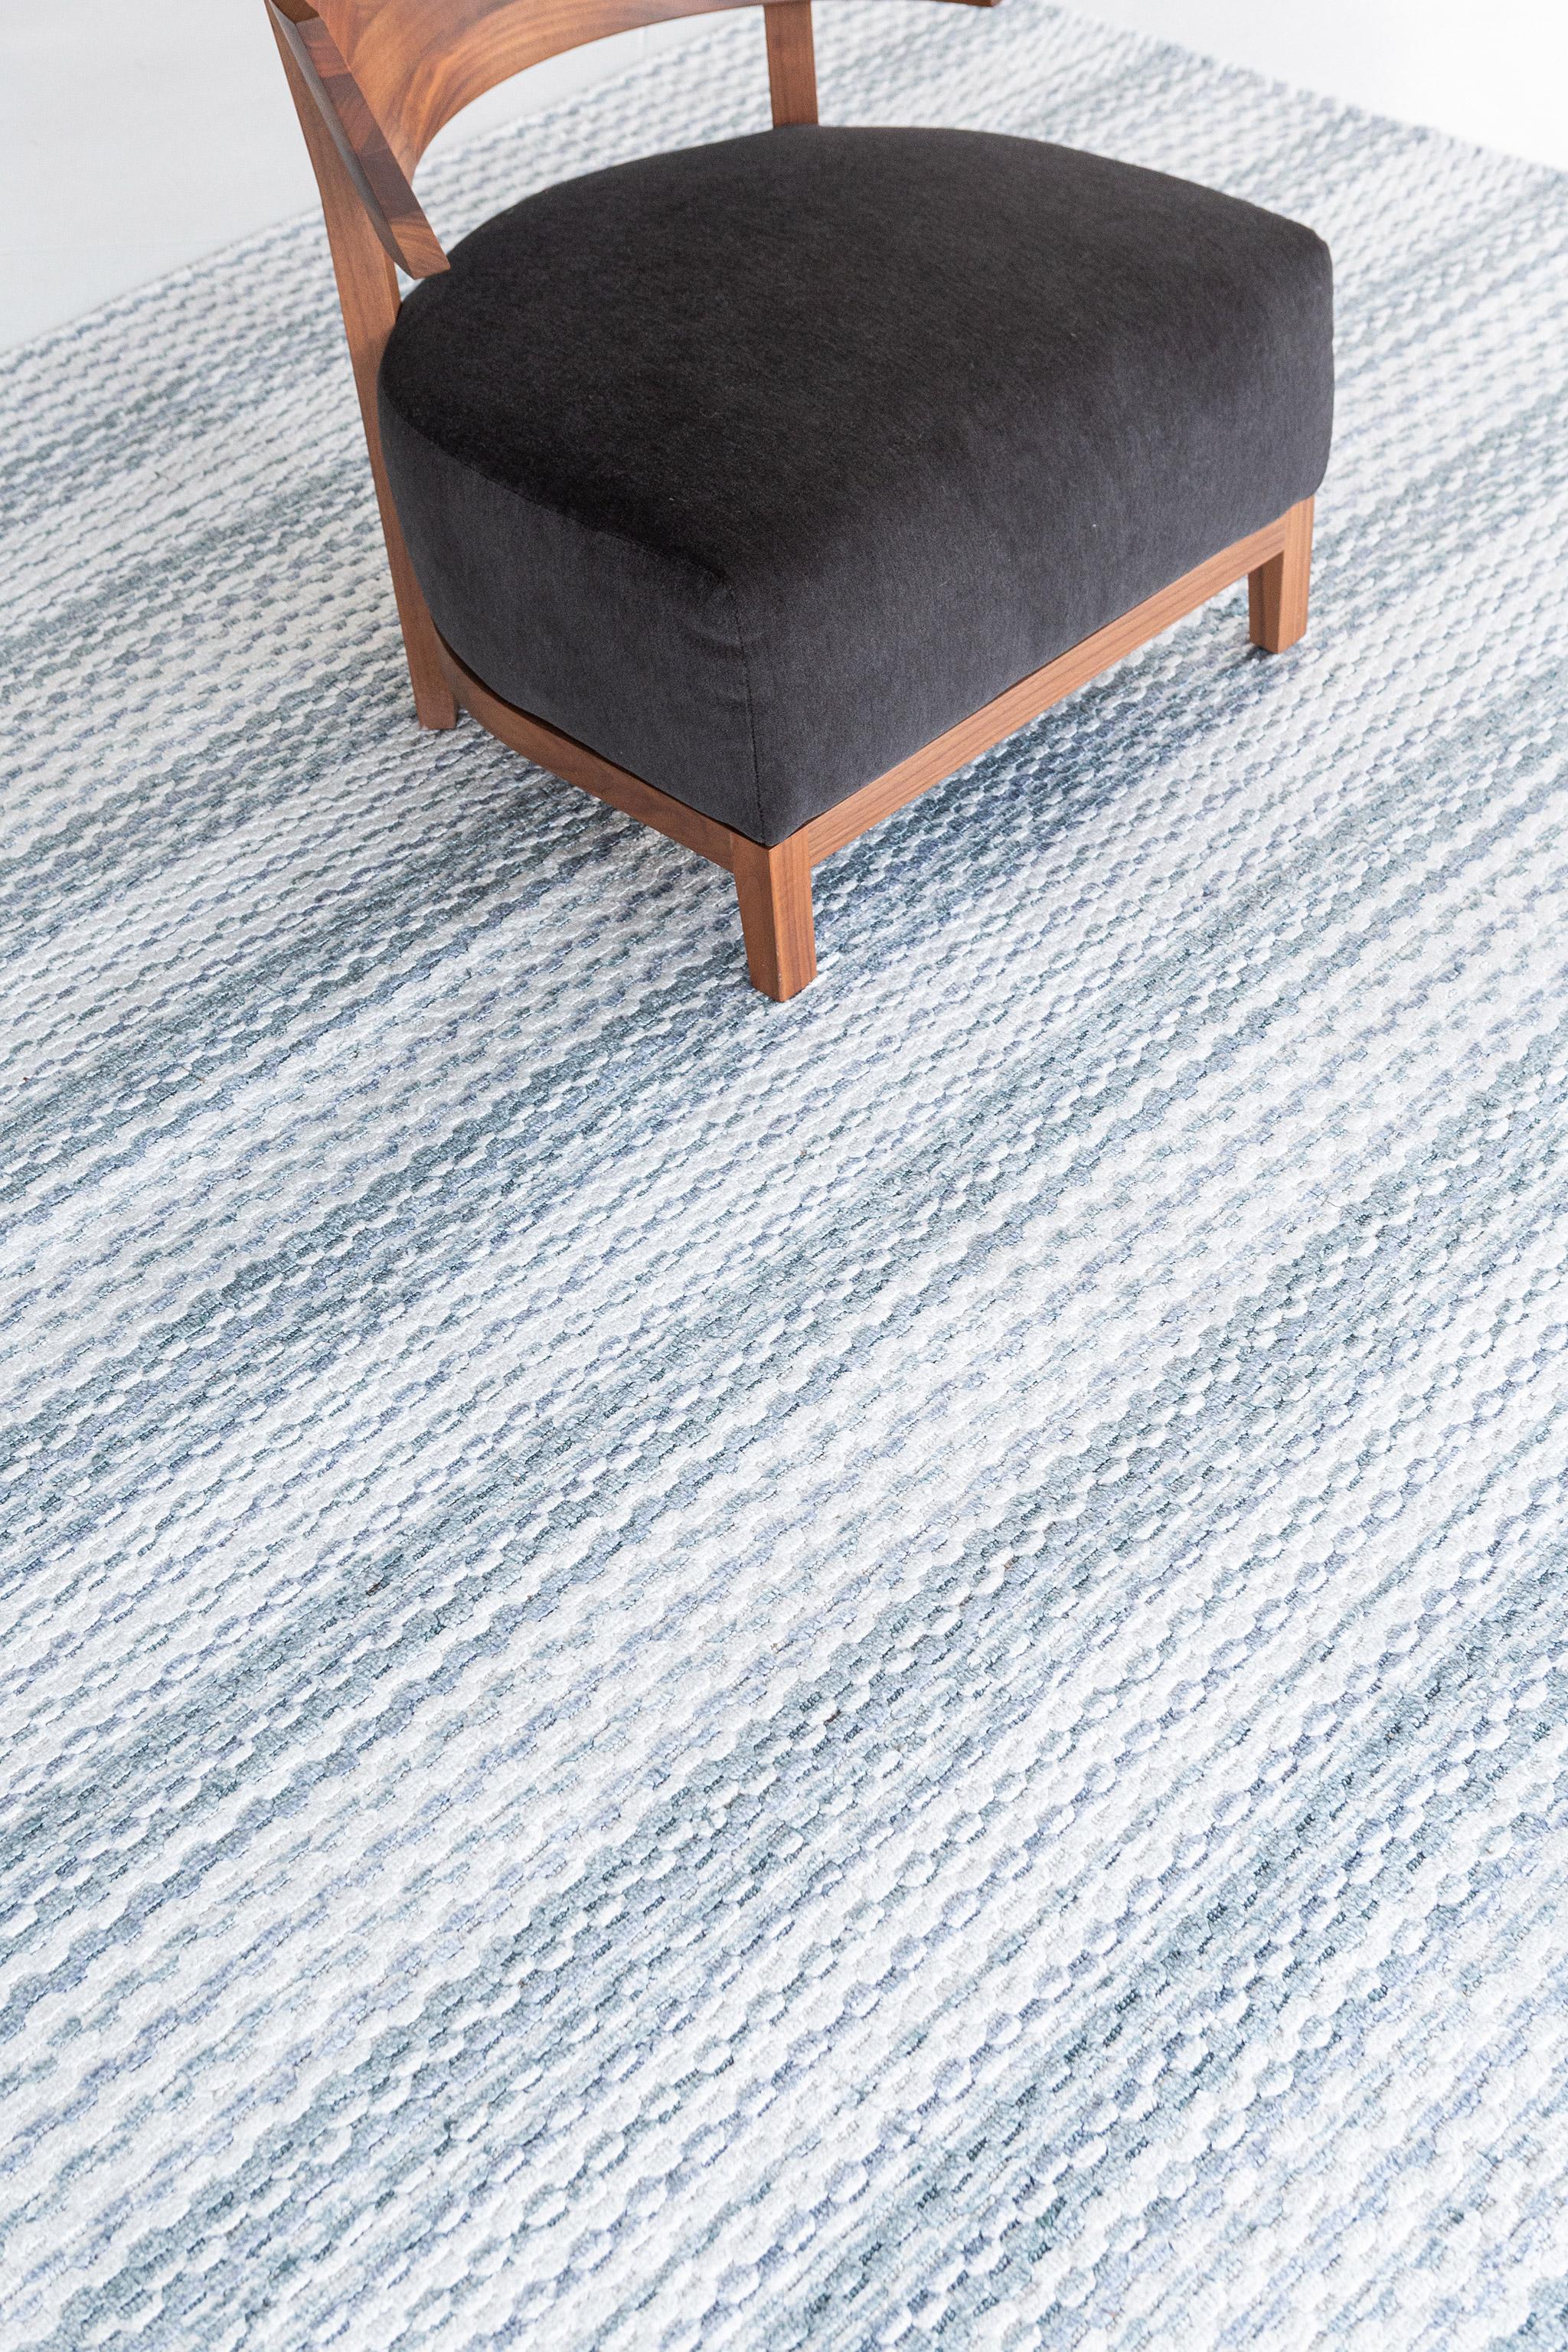 A fascinating modern hand loom rug in our Luca Collection. The delicate ribbed style rug in variegated shades of blue give it a sophisticated and beguiling feel. Repeating pile detailing also brings a tranquil and noteworthy uniqueness to this